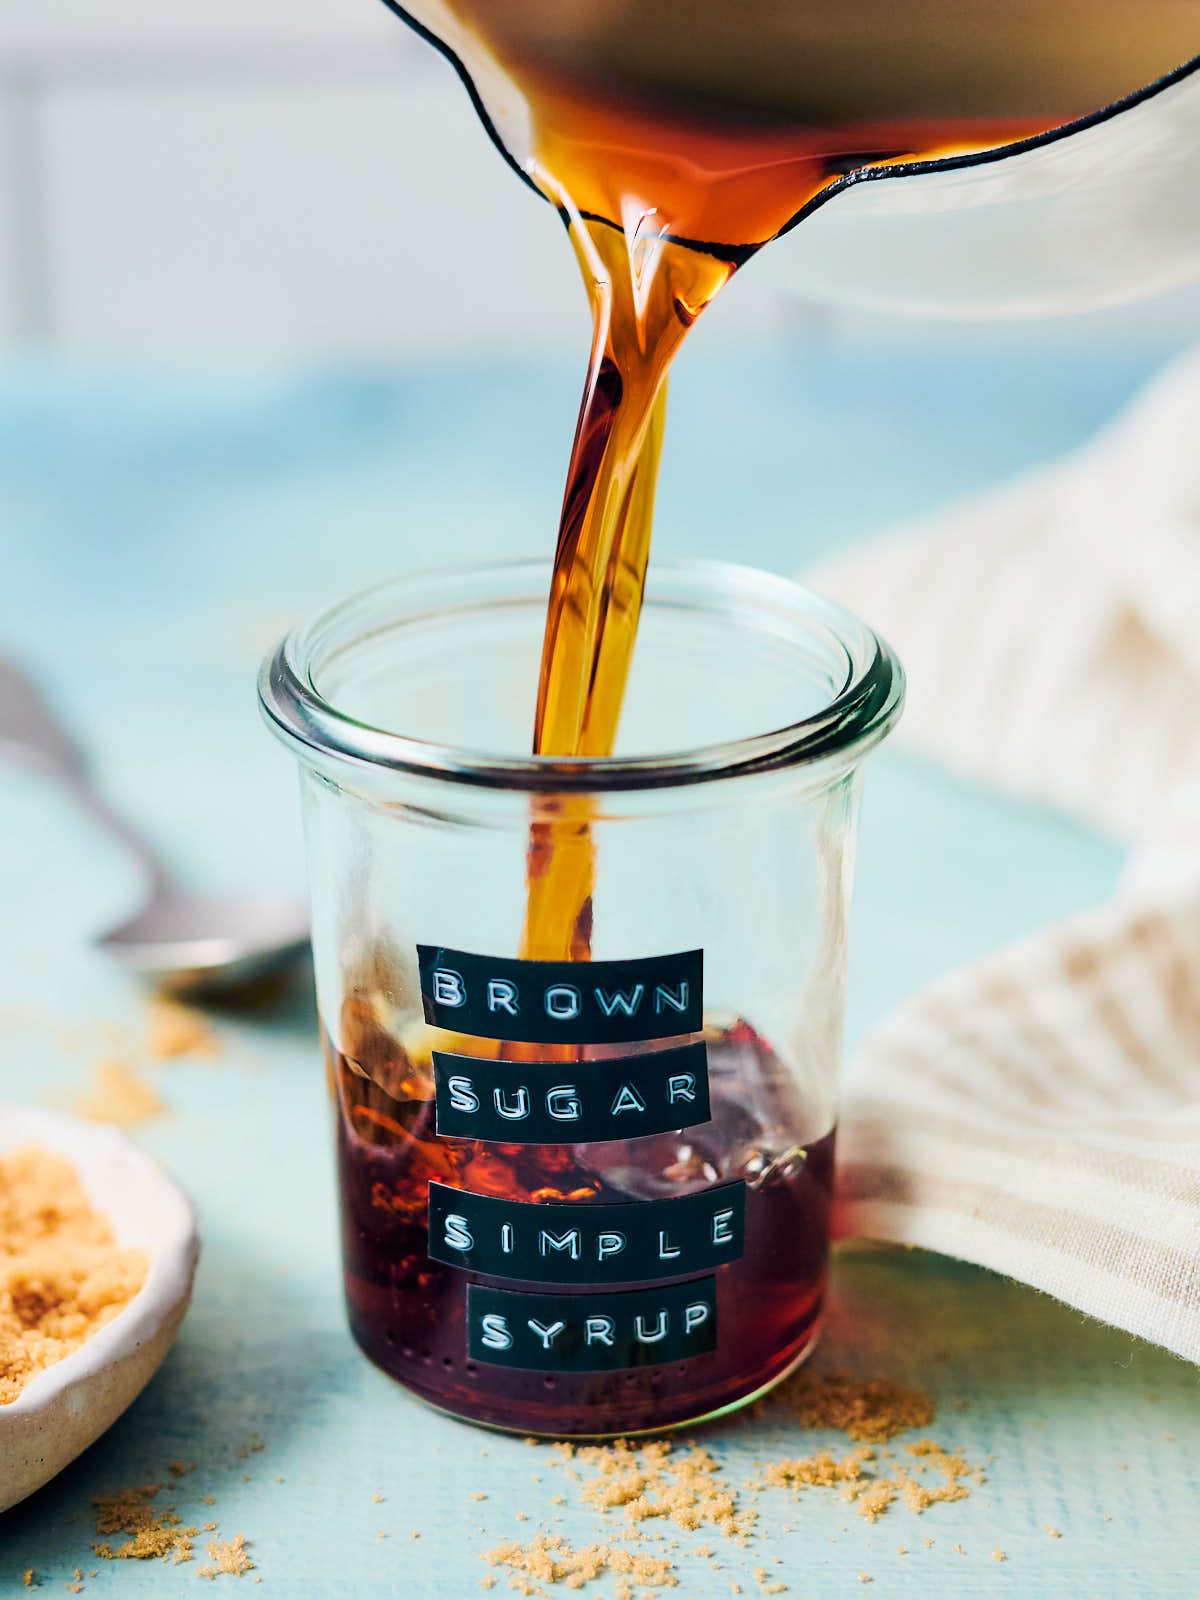 Brown sugar simple syrup being poured out of a saucepan into a glass jar.